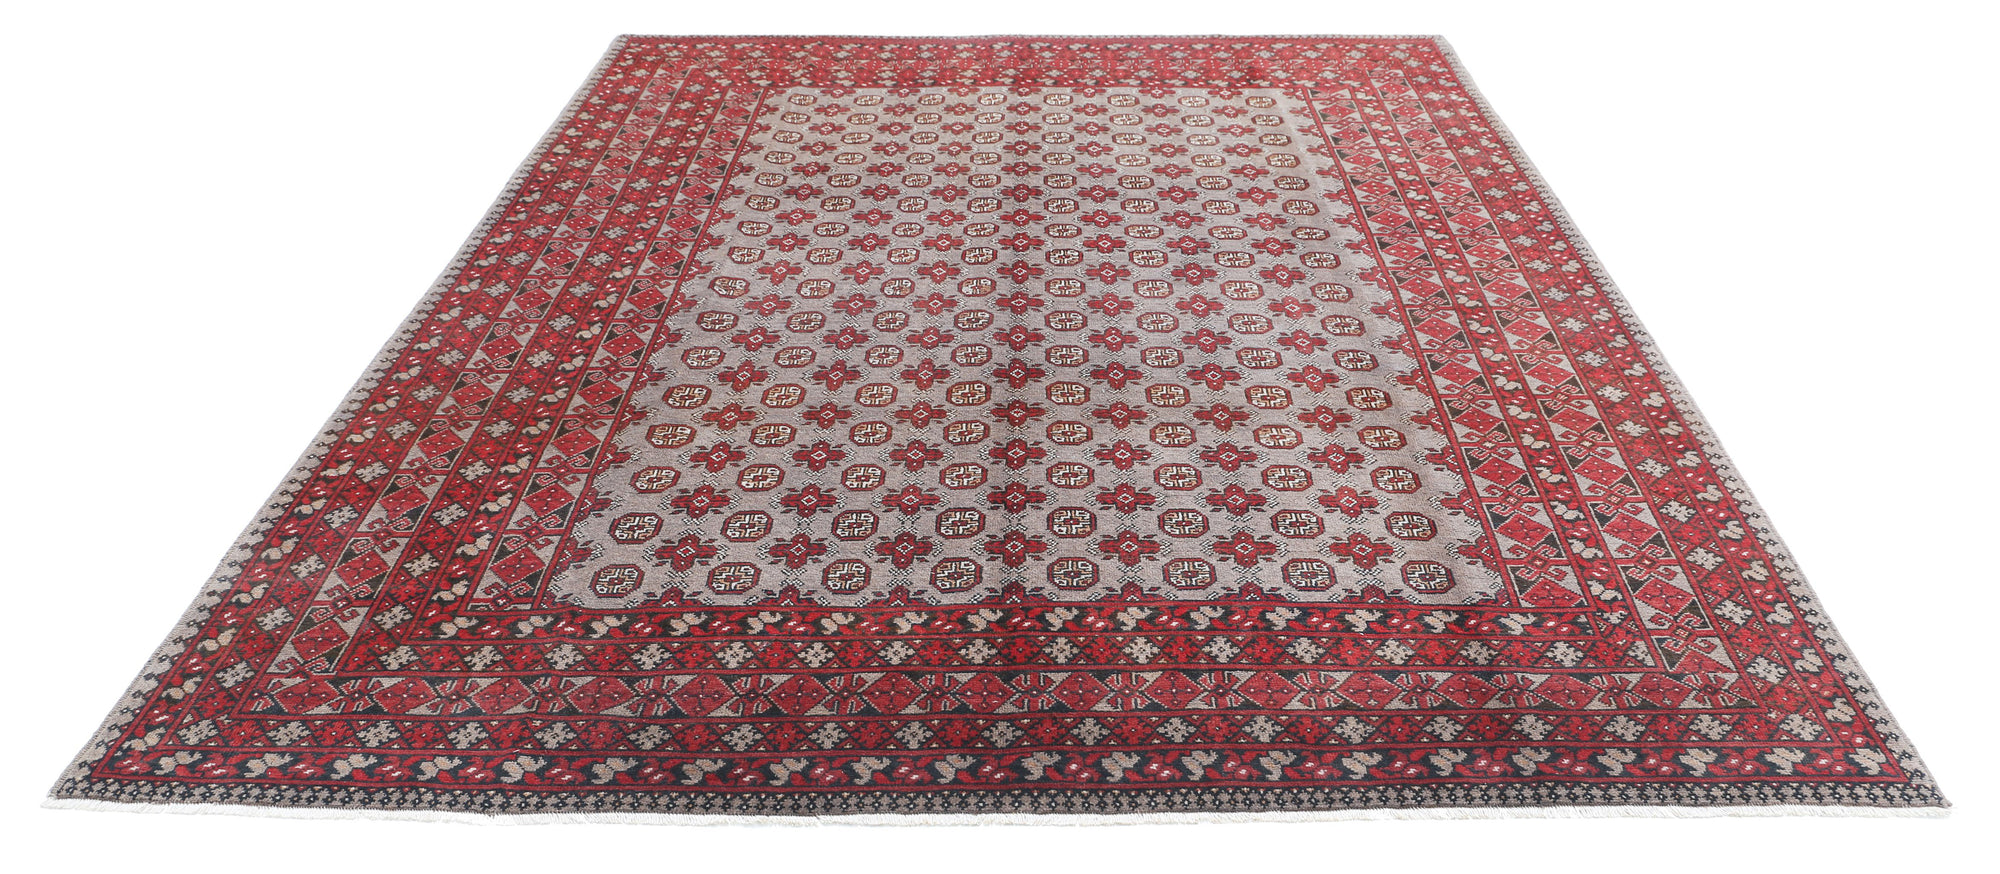 Revival-hand-knotted-gul-collection-wool-rug-5013984-3.jpg